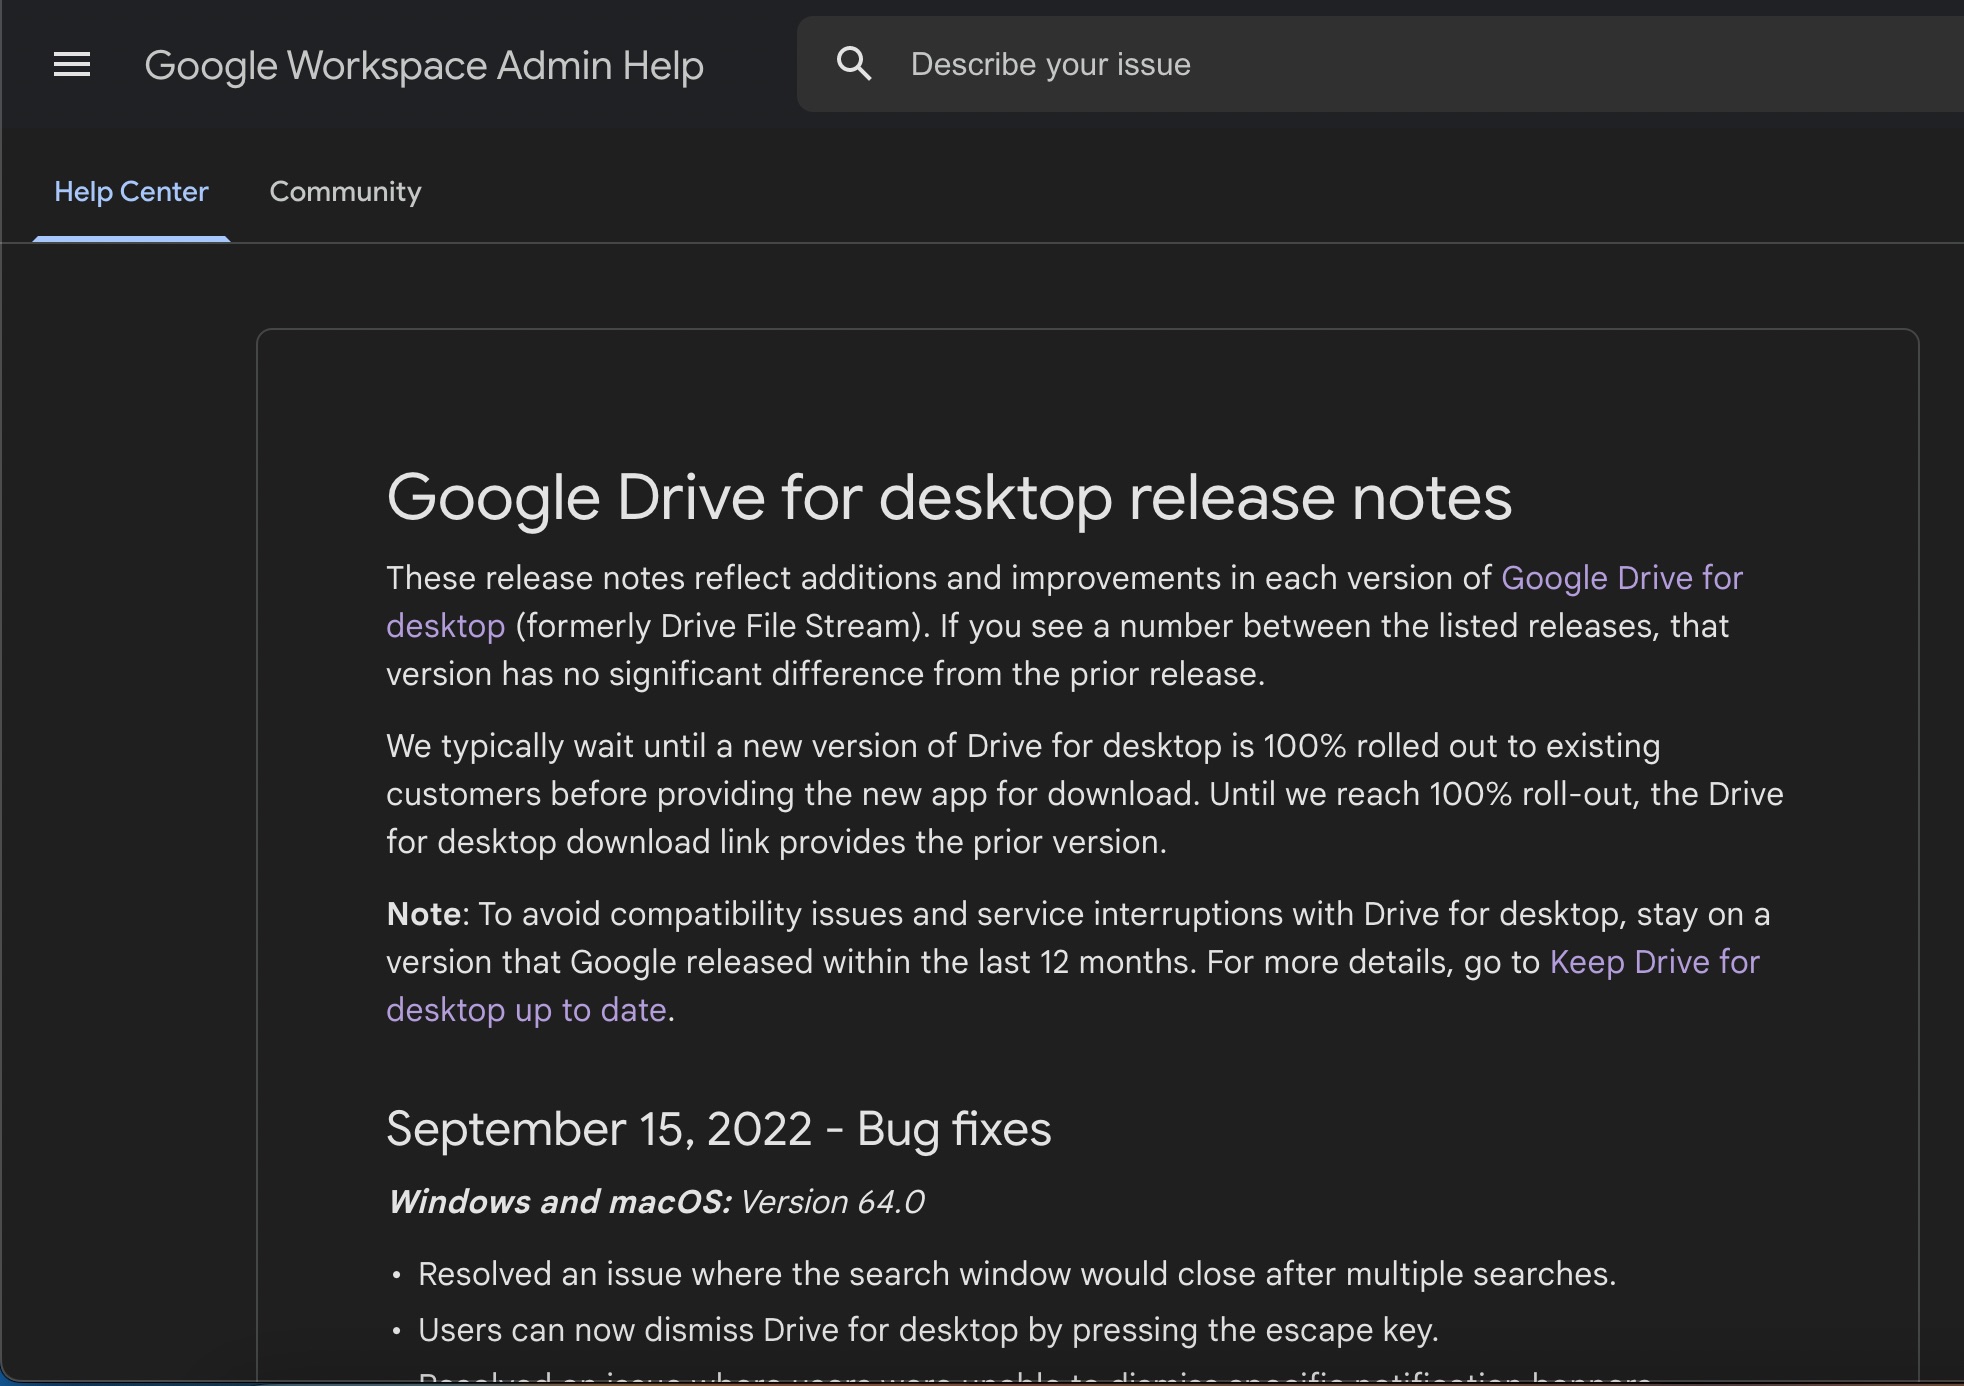 Google Drive Release Notes